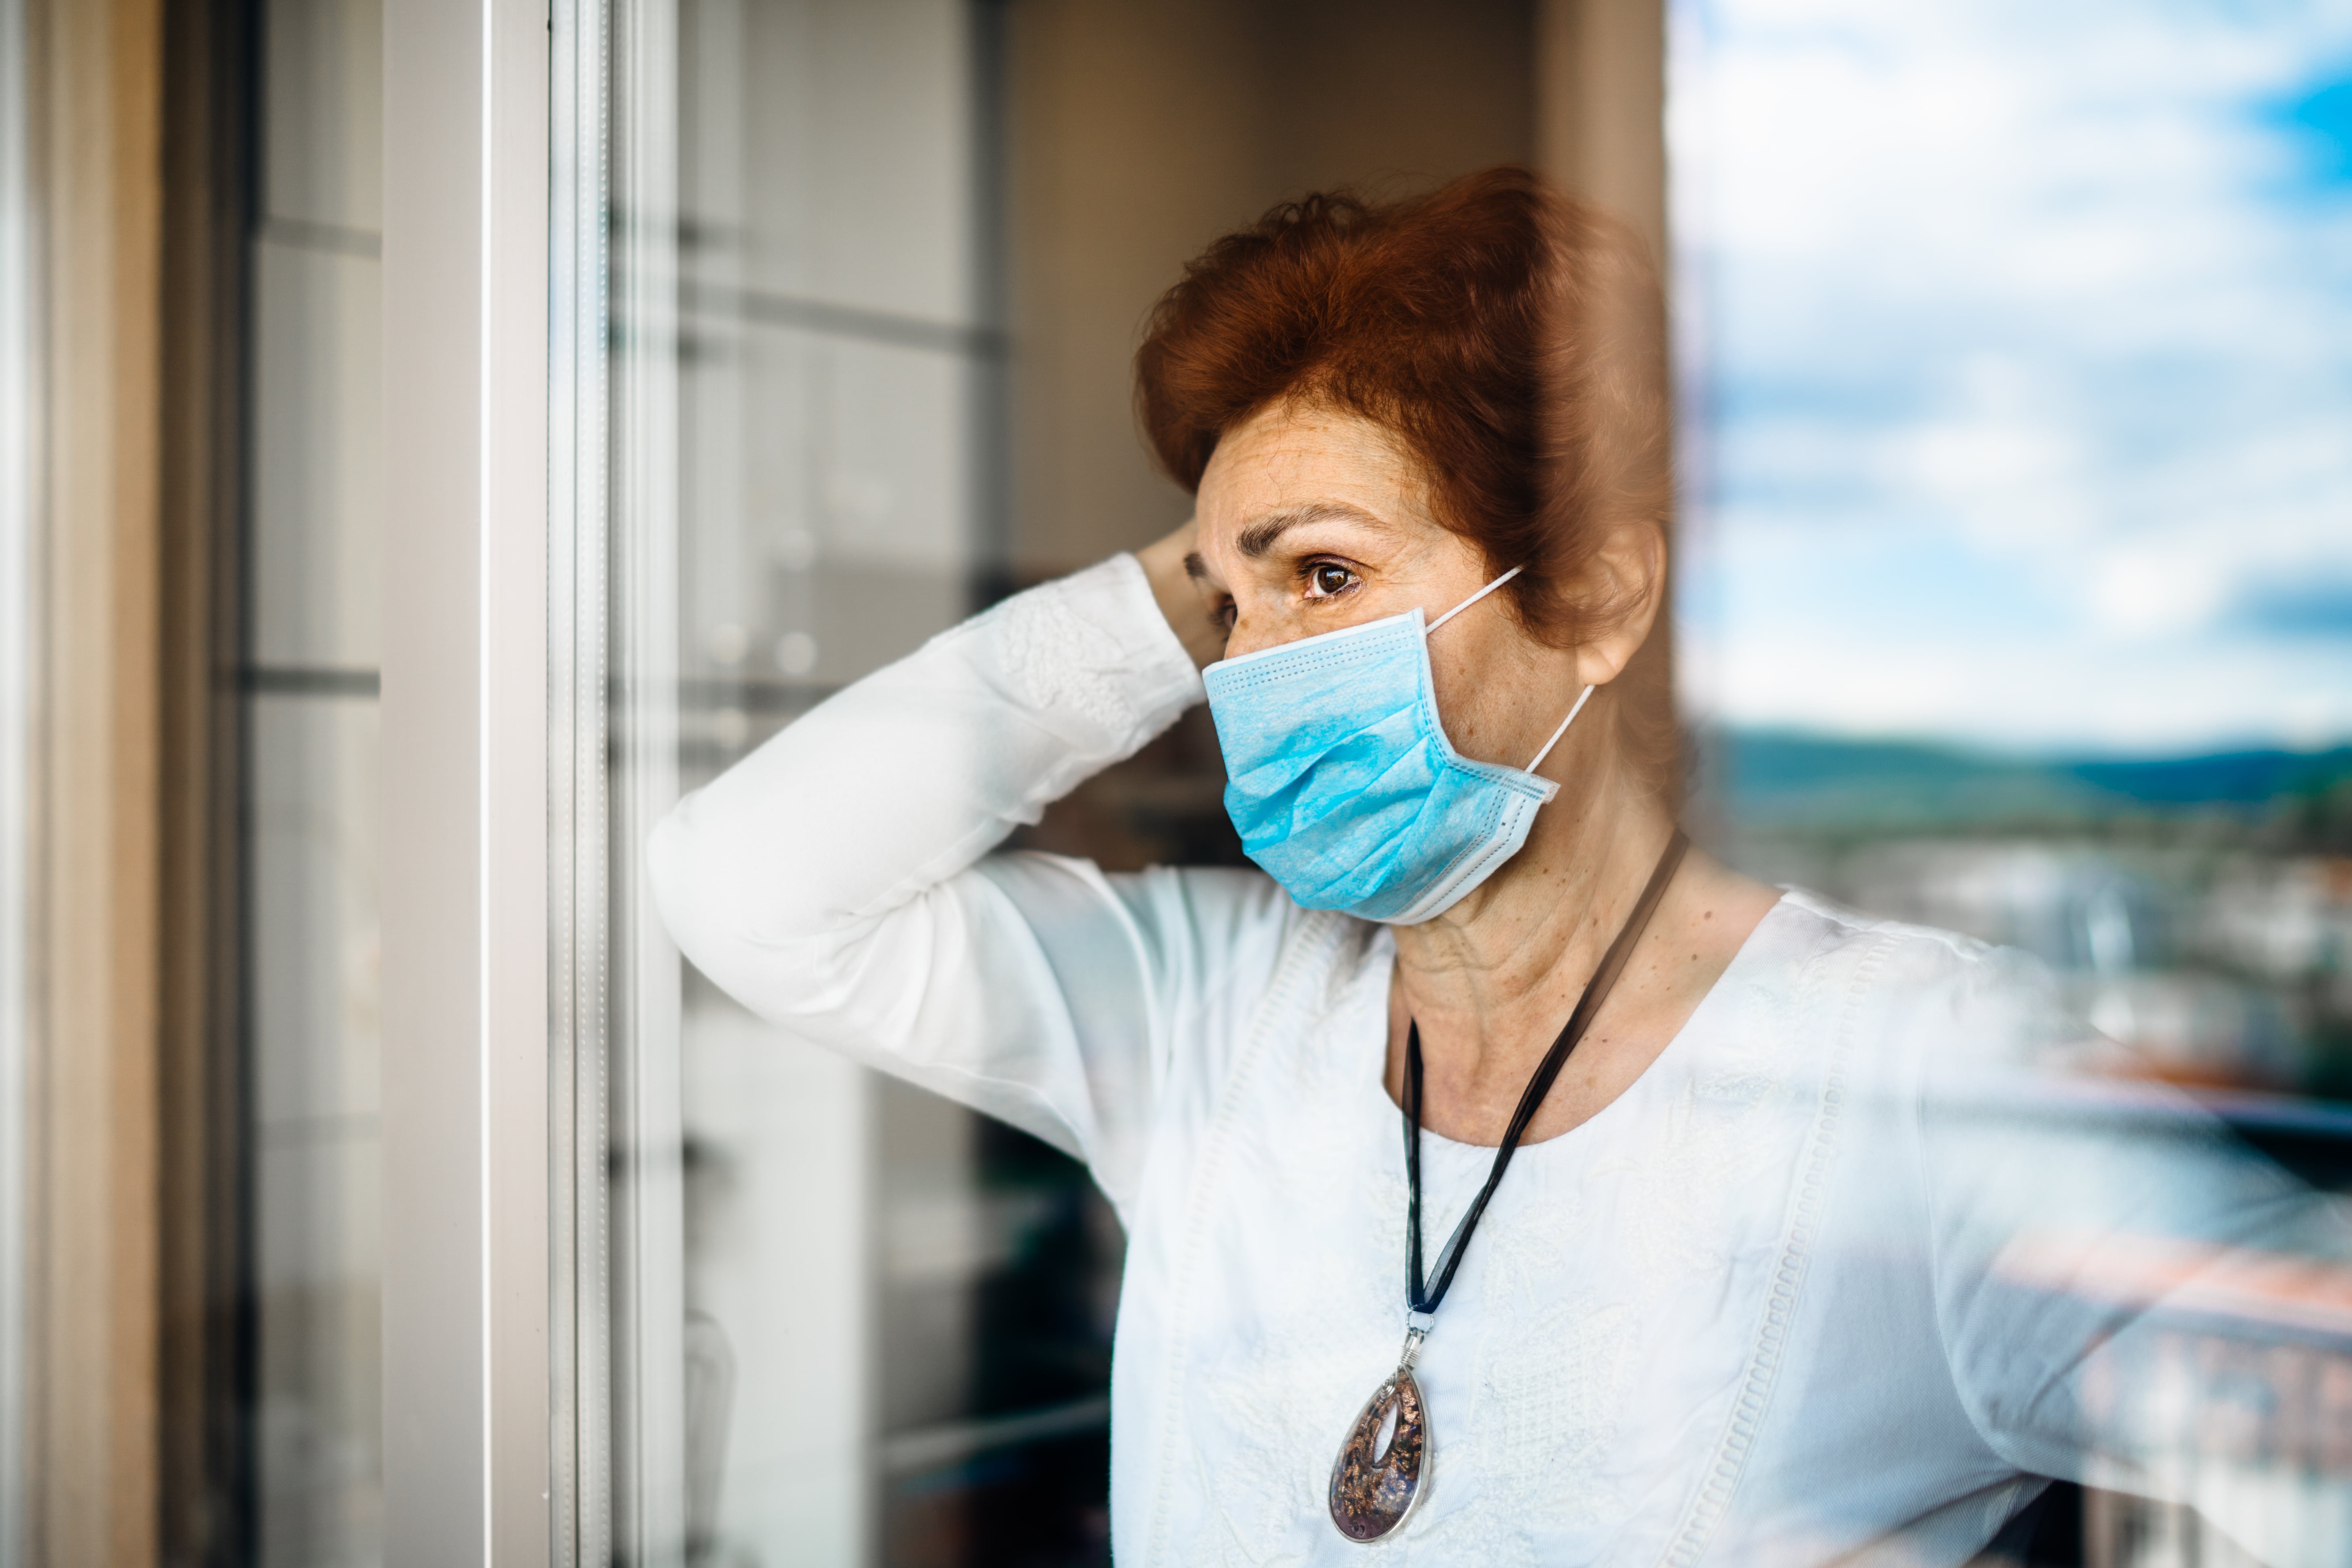 A caregiver wearing a protective face mask